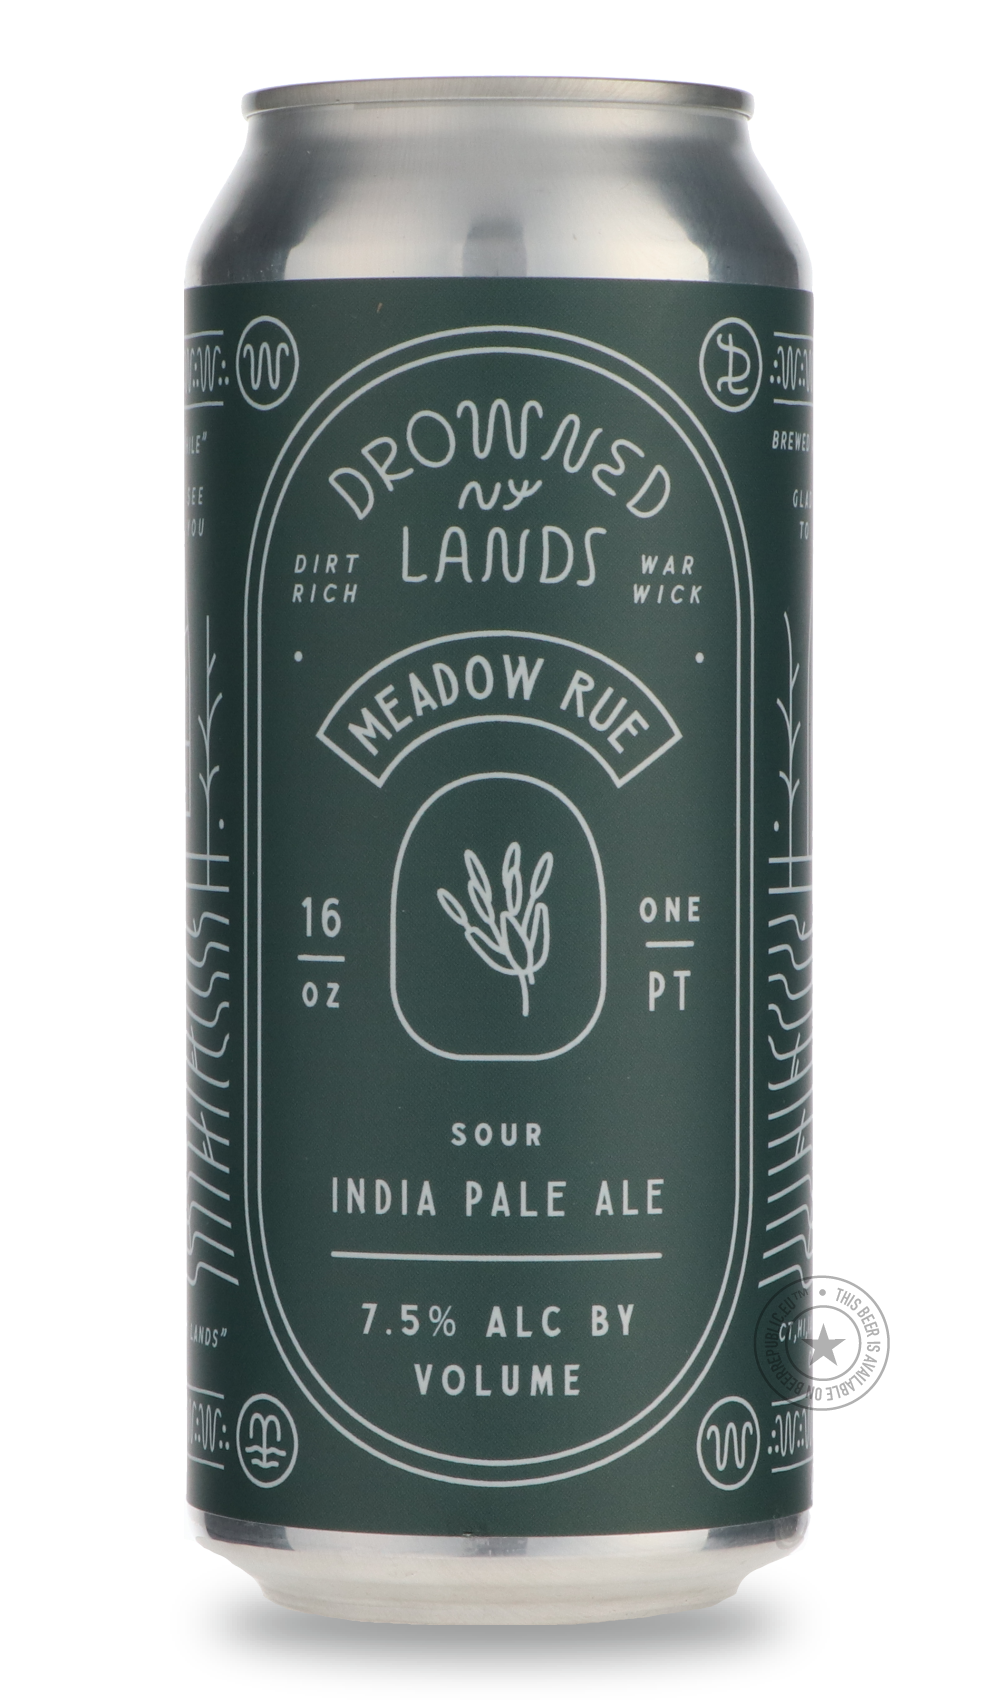 -The Drowned Lands- Meadow Rue-IPA- Only @ Beer Republic - The best online beer store for American & Canadian craft beer - Buy beer online from the USA and Canada - Bier online kopen - Amerikaans bier kopen - Craft beer store - Craft beer kopen - Amerikanisch bier kaufen - Bier online kaufen - Acheter biere online - IPA - Stout - Porter - New England IPA - Hazy IPA - Imperial Stout - Barrel Aged - Barrel Aged Imperial Stout - Brown - Dark beer - Blond - Blonde - Pilsner - Lager - Wheat - Weizen - Amber - Ba